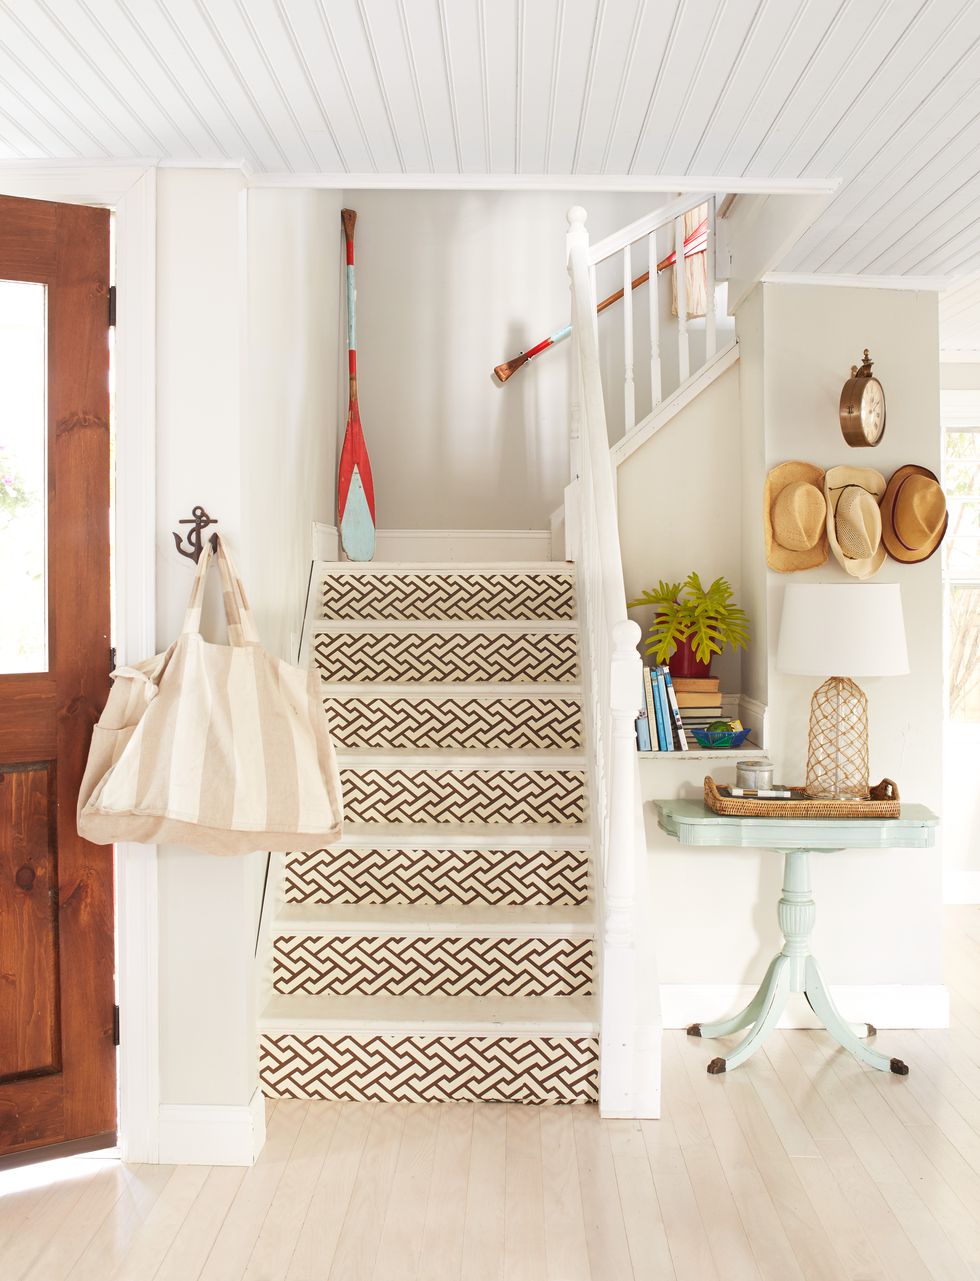 Stenciled Stair Trend Creates the Perfect Entryway Decor - Stencil Stories